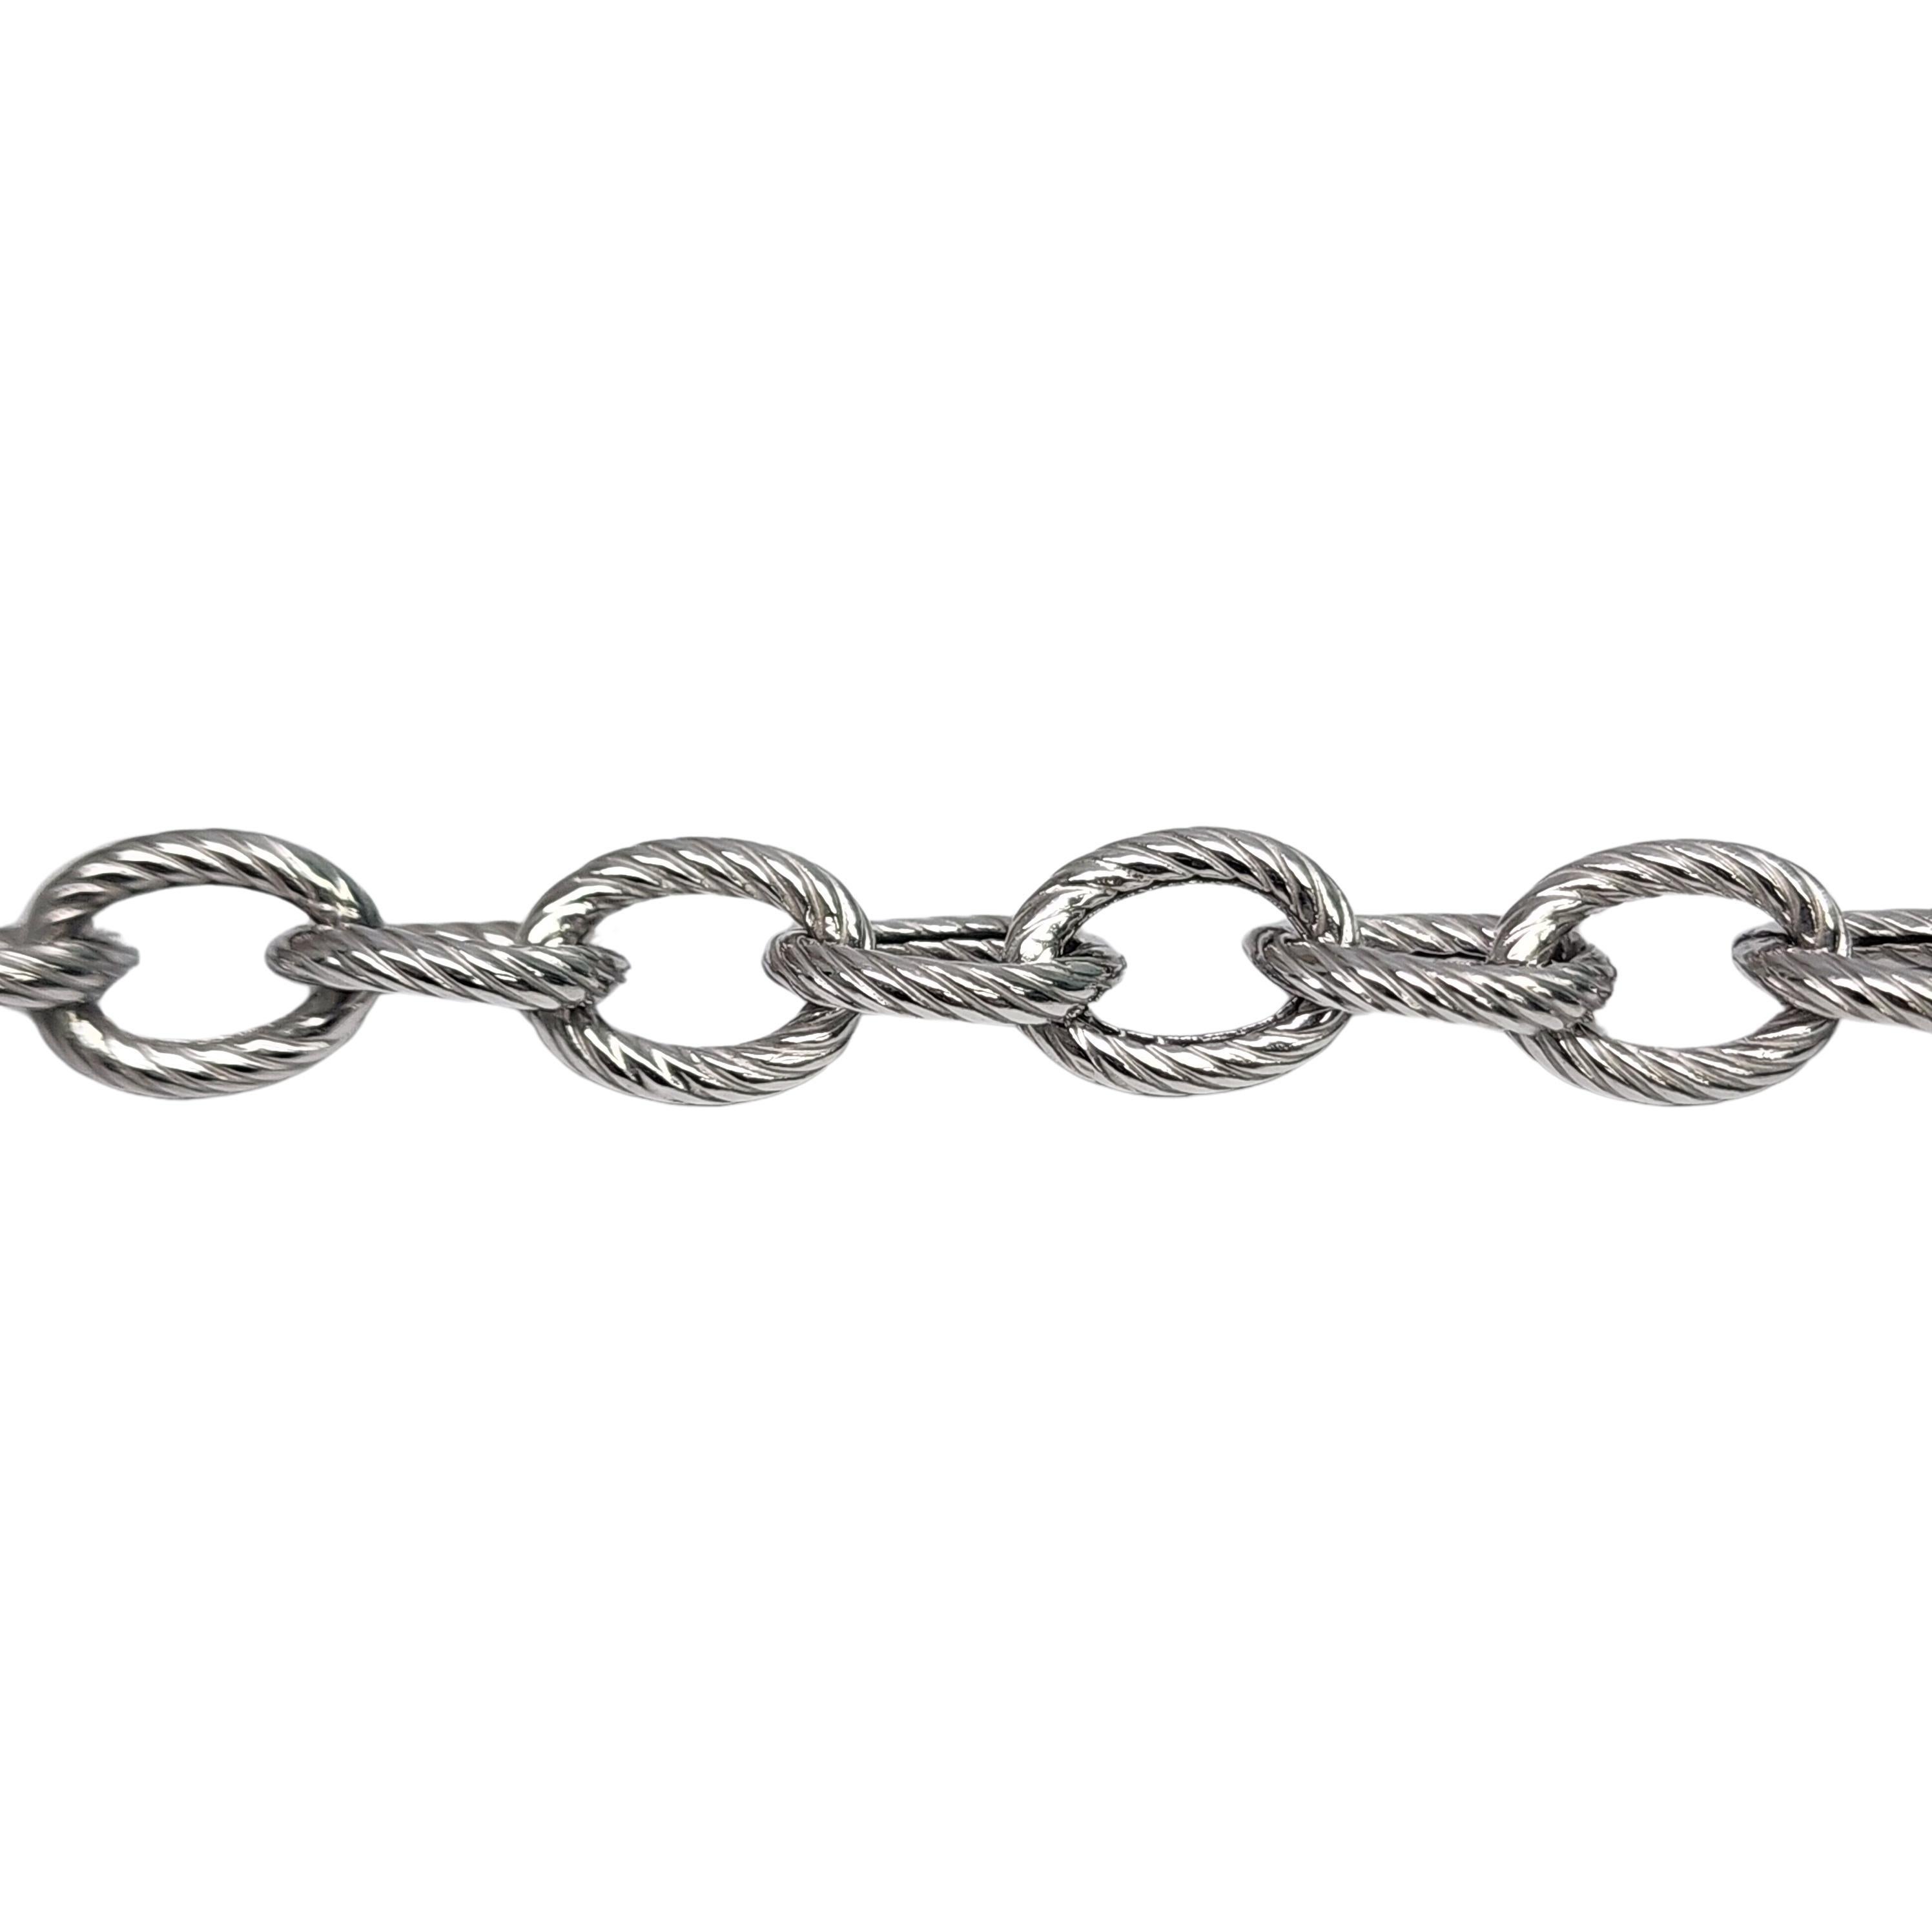 Sterling silver textured oval link CZ heart clasp chain necklace by Judith Ripka.

Beautiful textured oval links with a heart shaped clasp adorned with small round CZs.

Weighs approx 17.6g, 11.3dwt

Measures approx 20